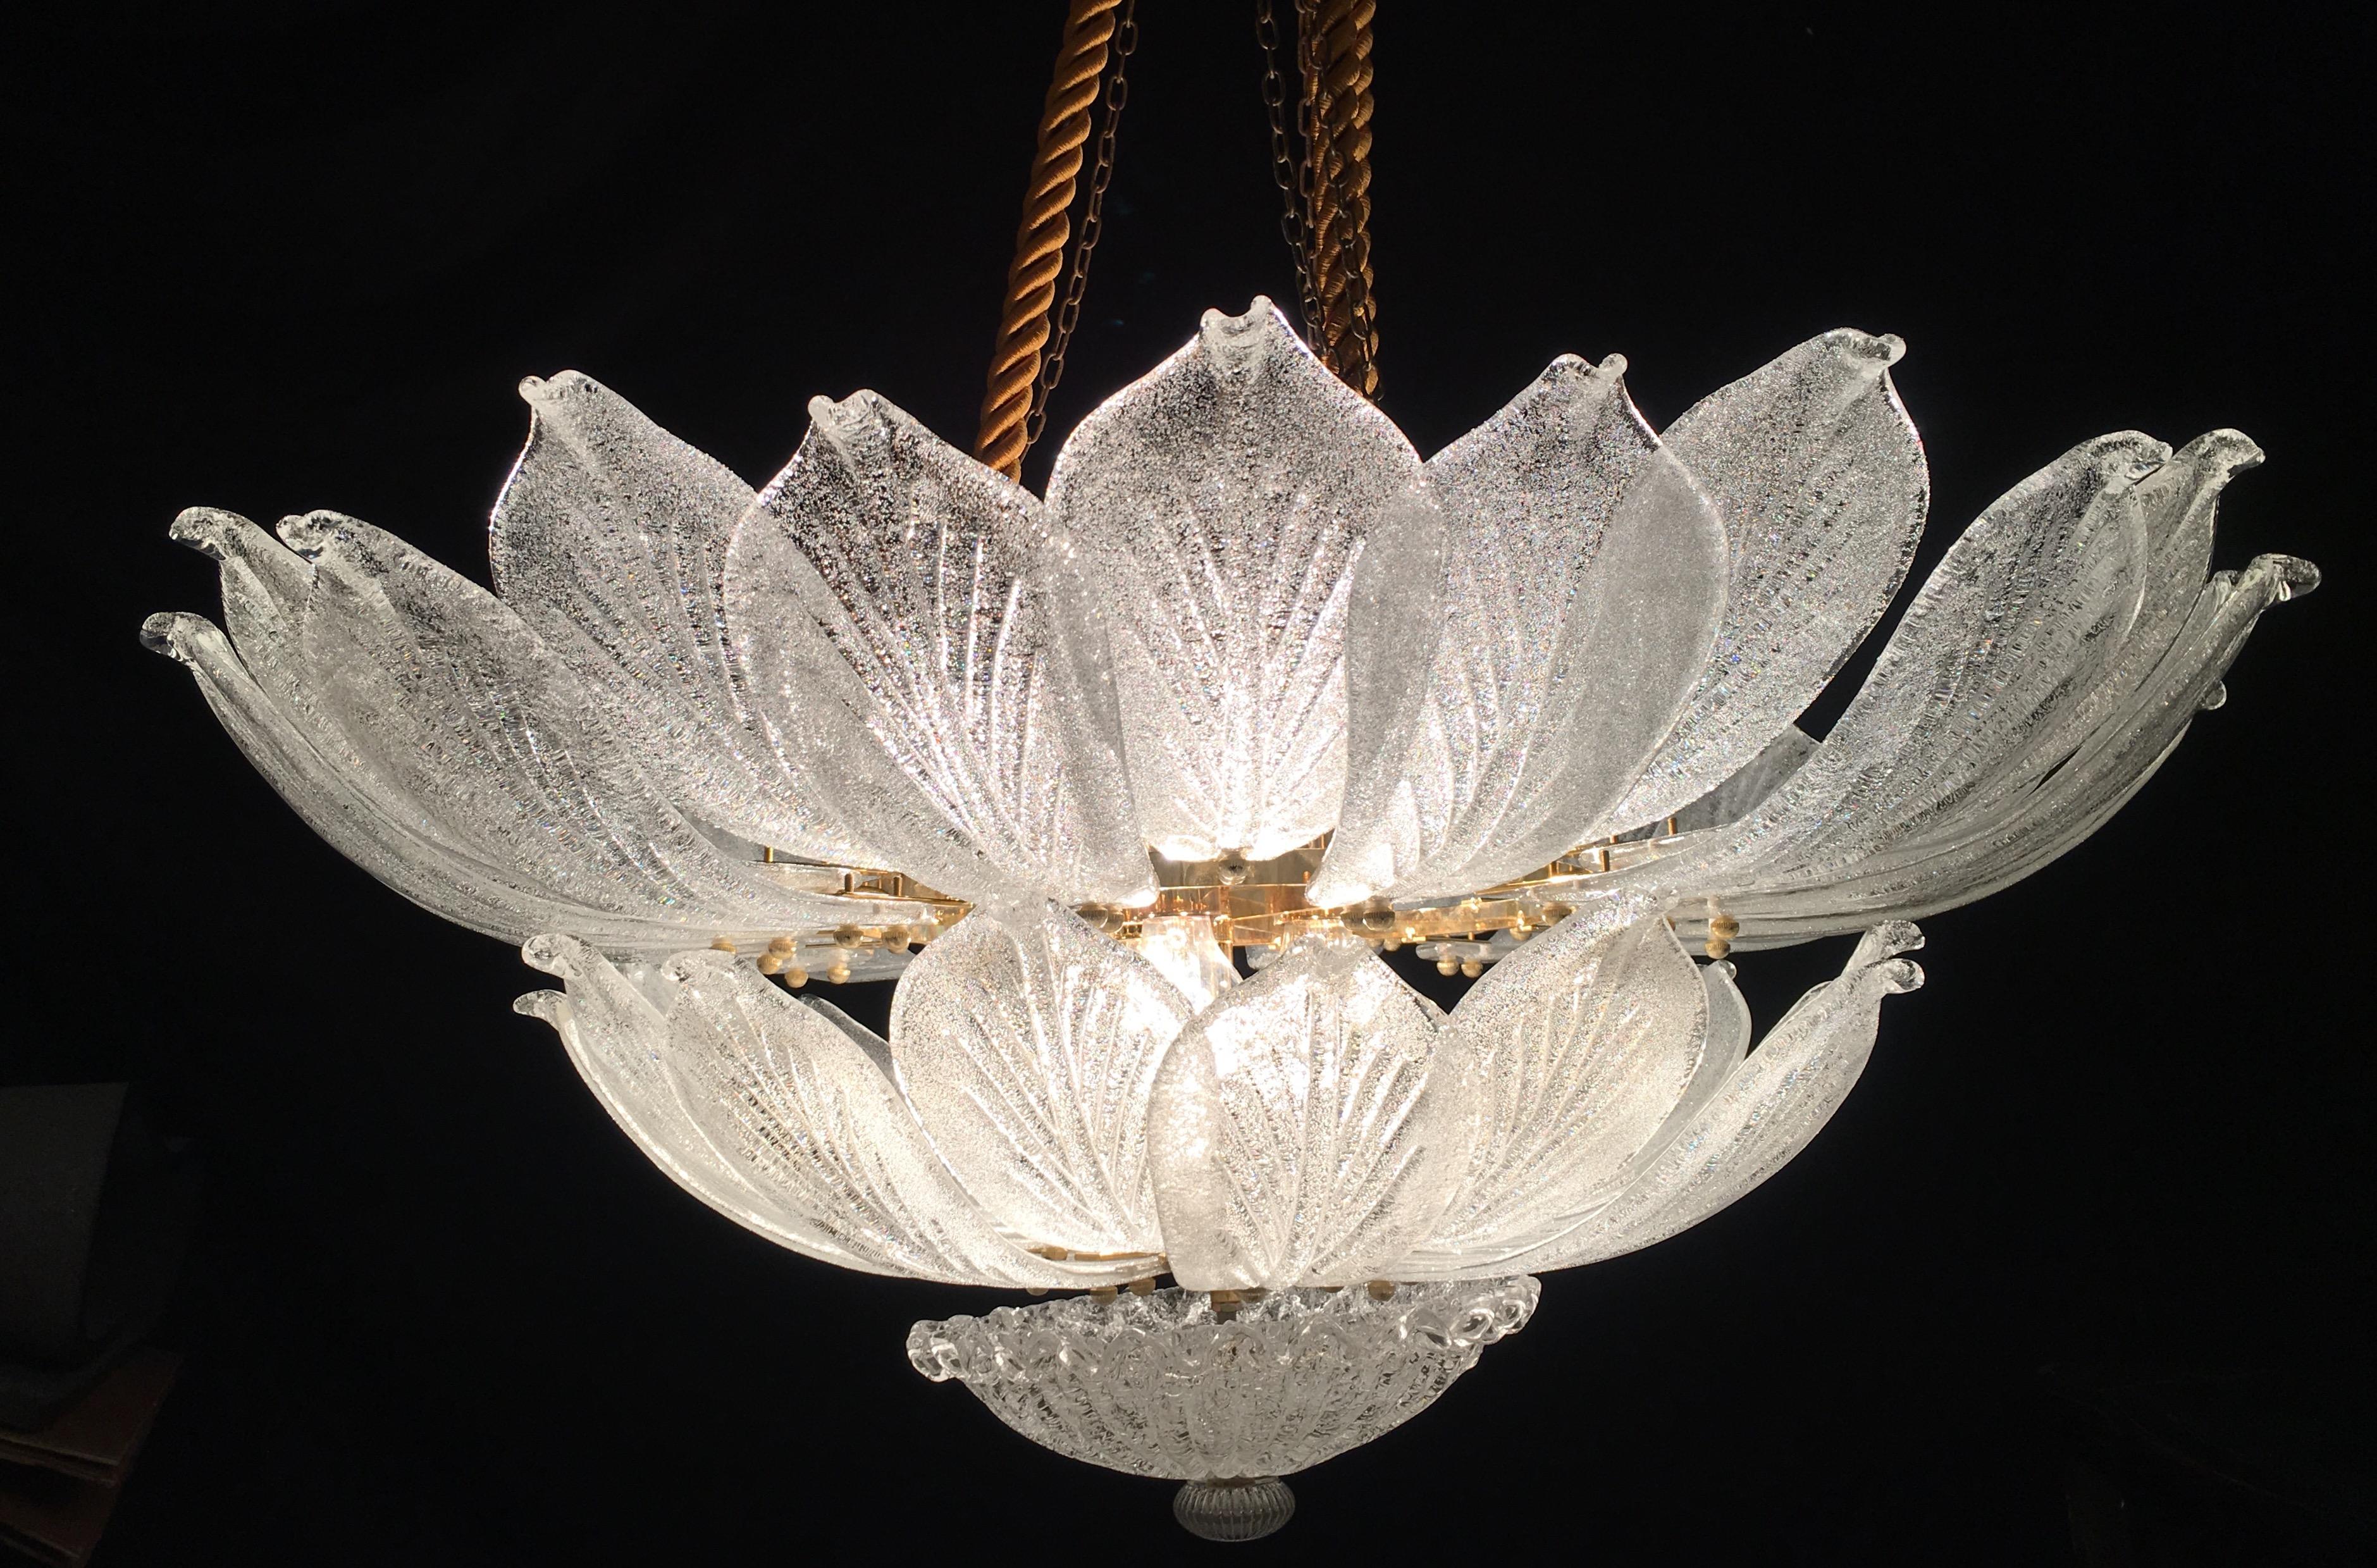 Realized in pure Murano glass consists of an incredible number of leaves. The structure is gilt-metal. 10 E27 lights spread a magical light.
Available also a pair.
 Measures: Diameter 100 cm, height 46 cm without the chain.